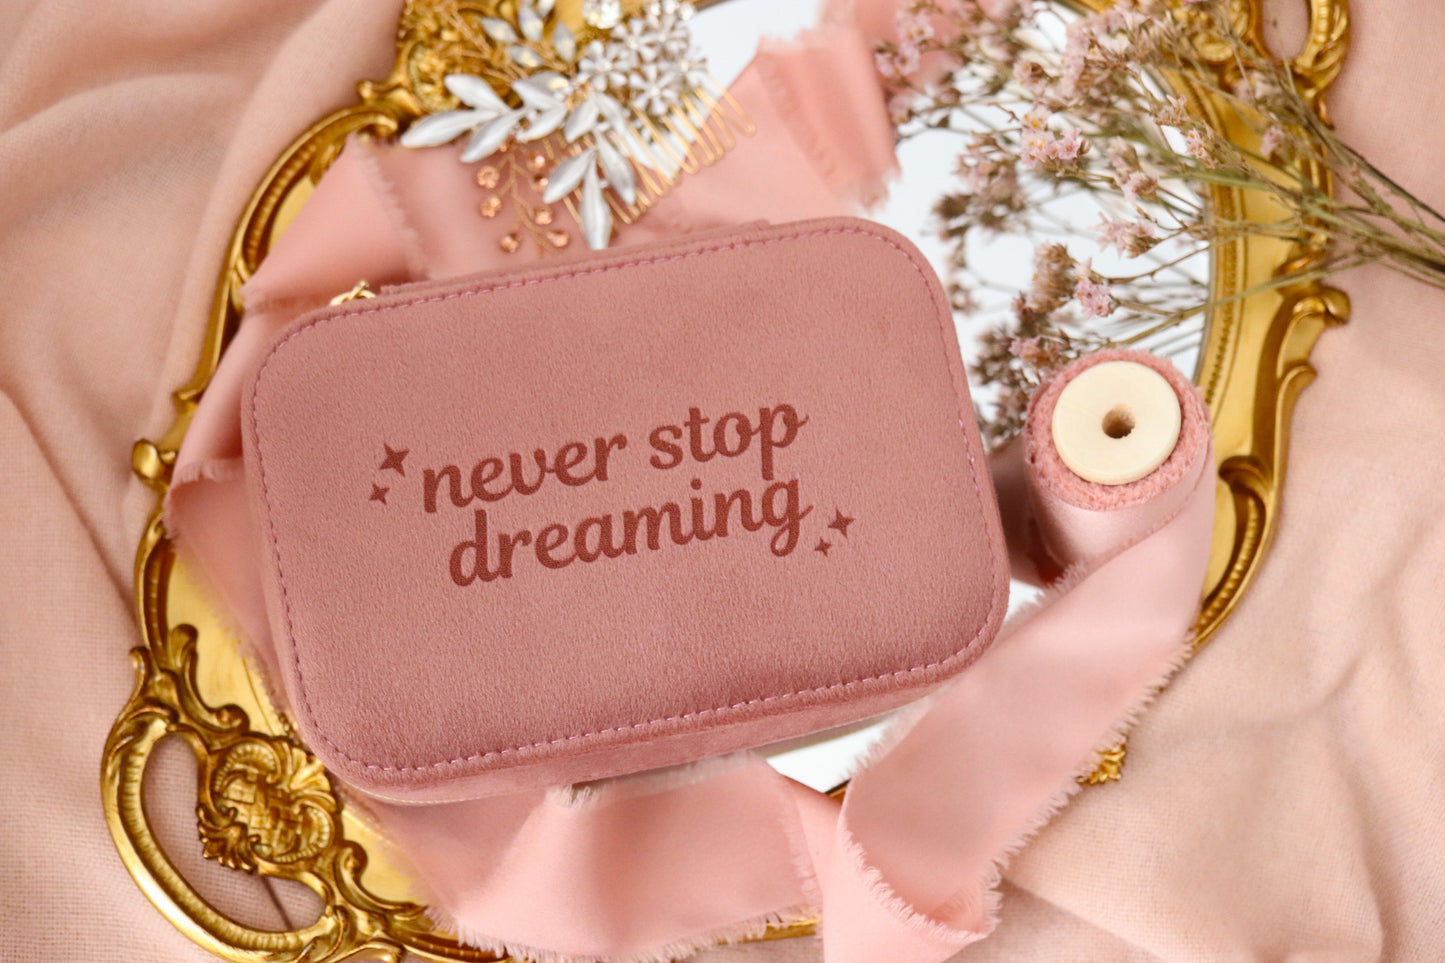 NEVER STOP DREAMING SUEDE JEWELRY CASE